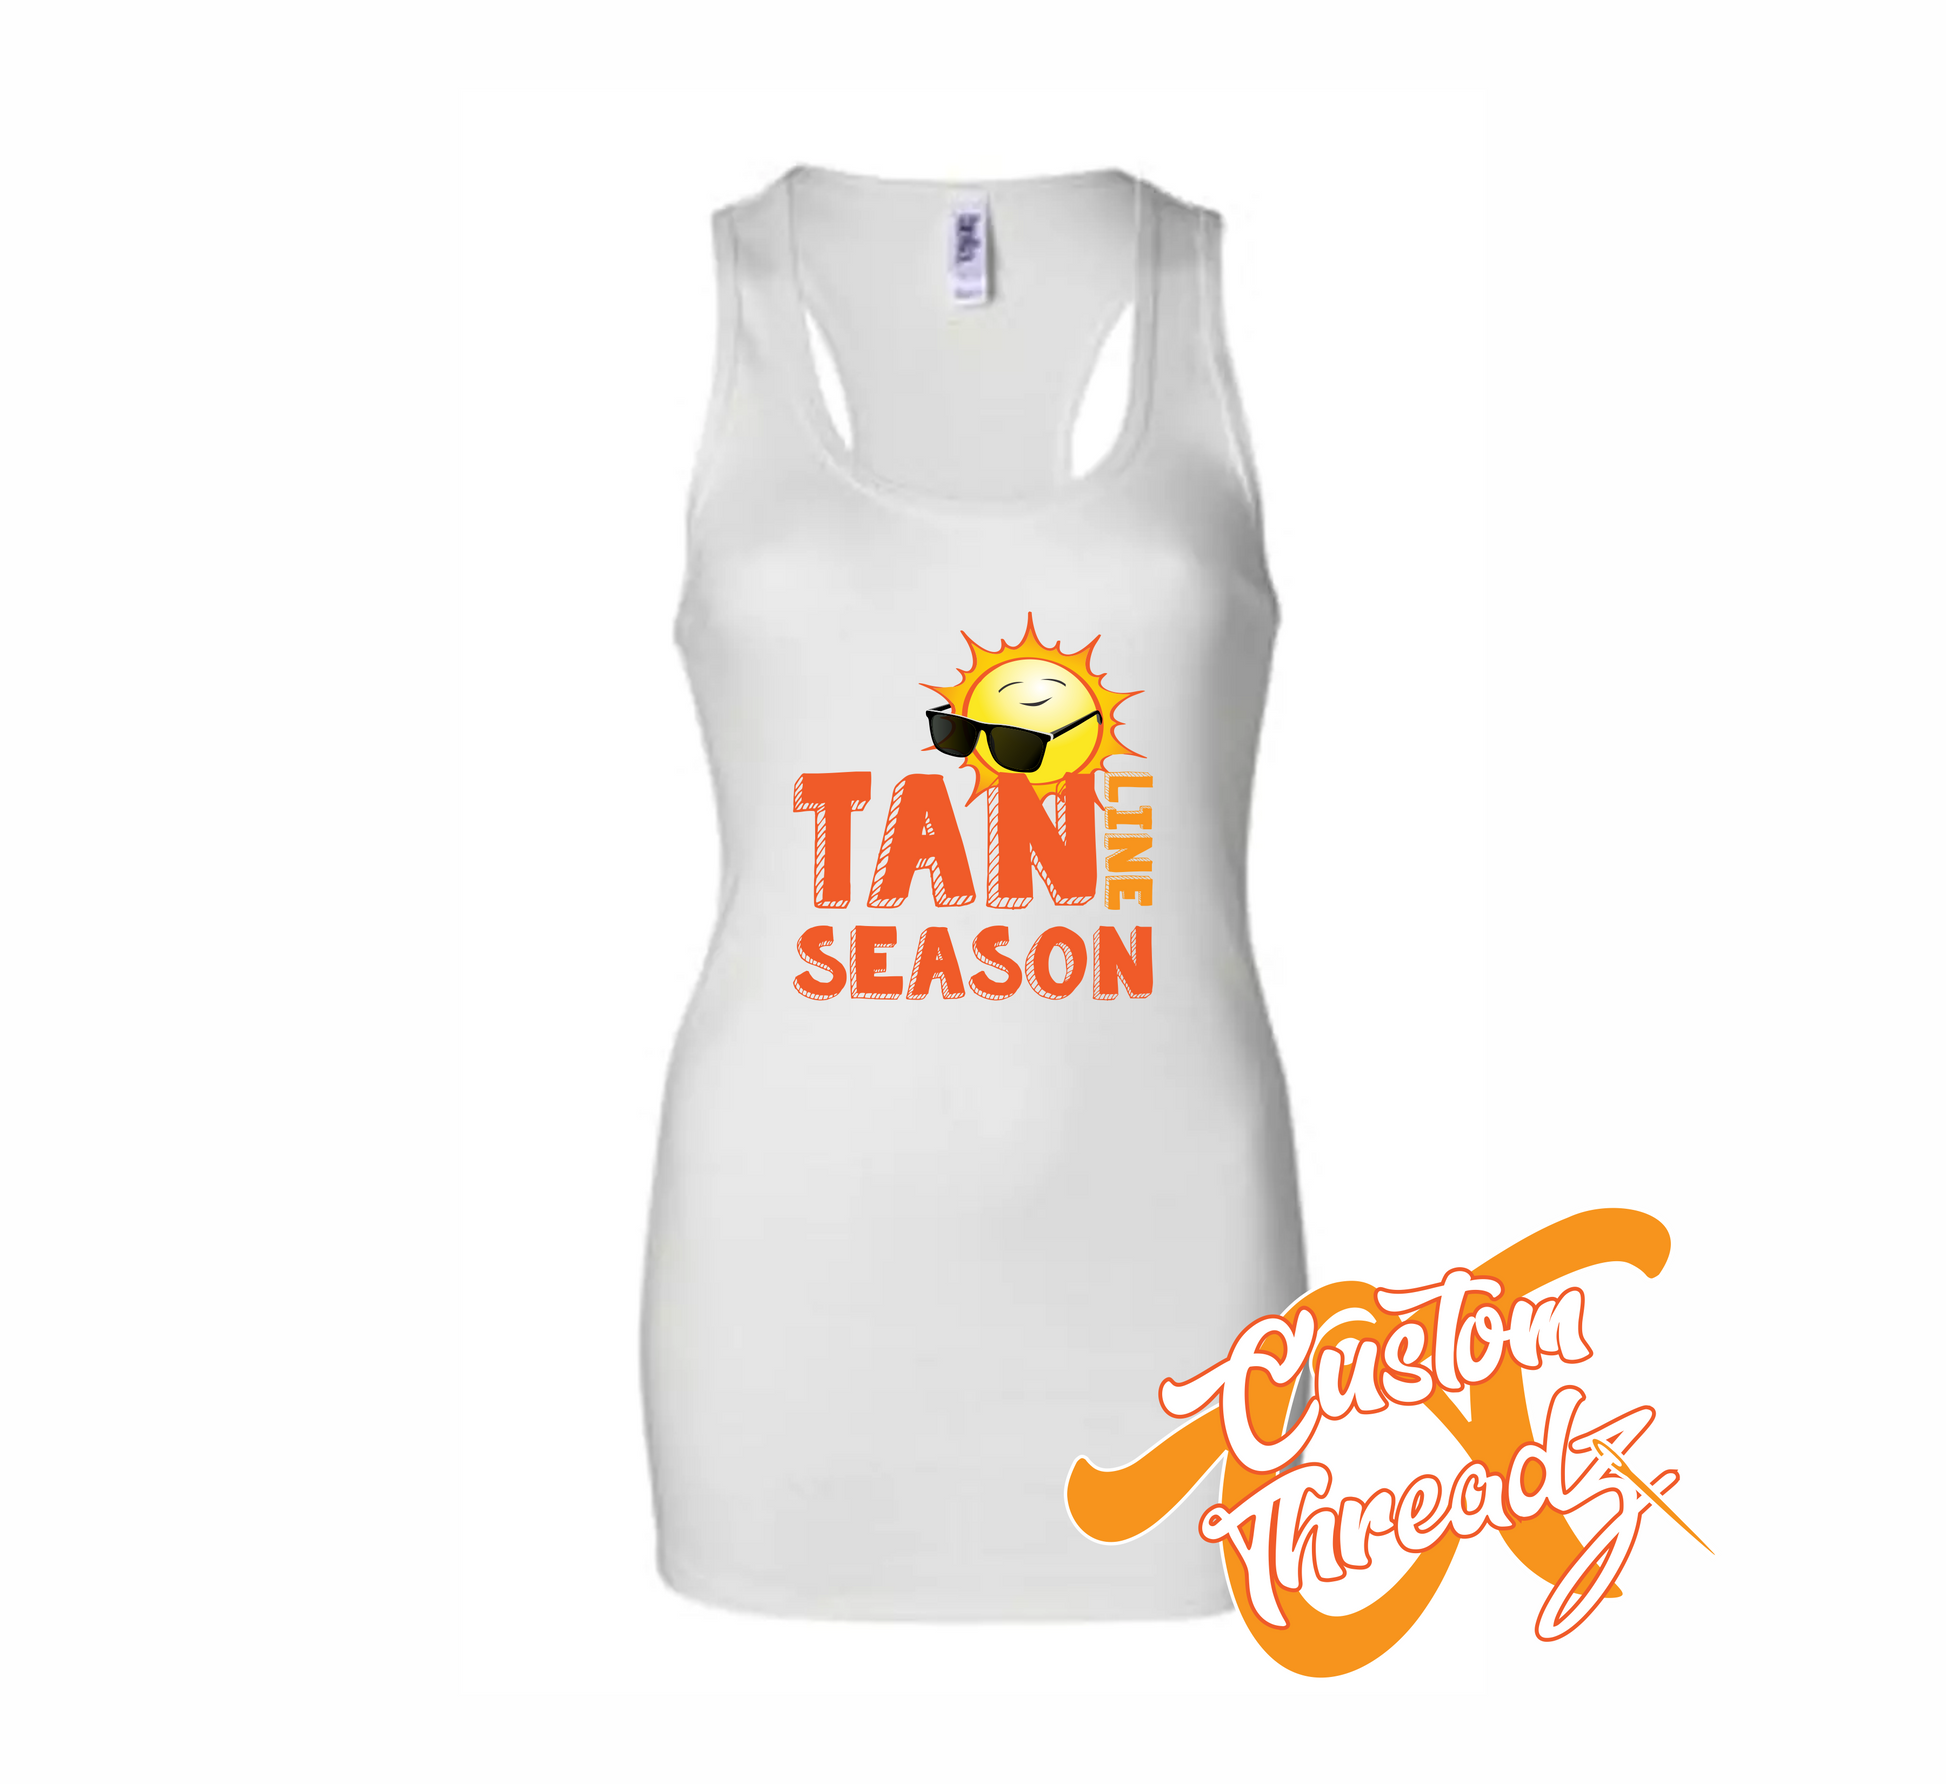 white womens tank top with tan line season sun with sunglasses DTG printed design